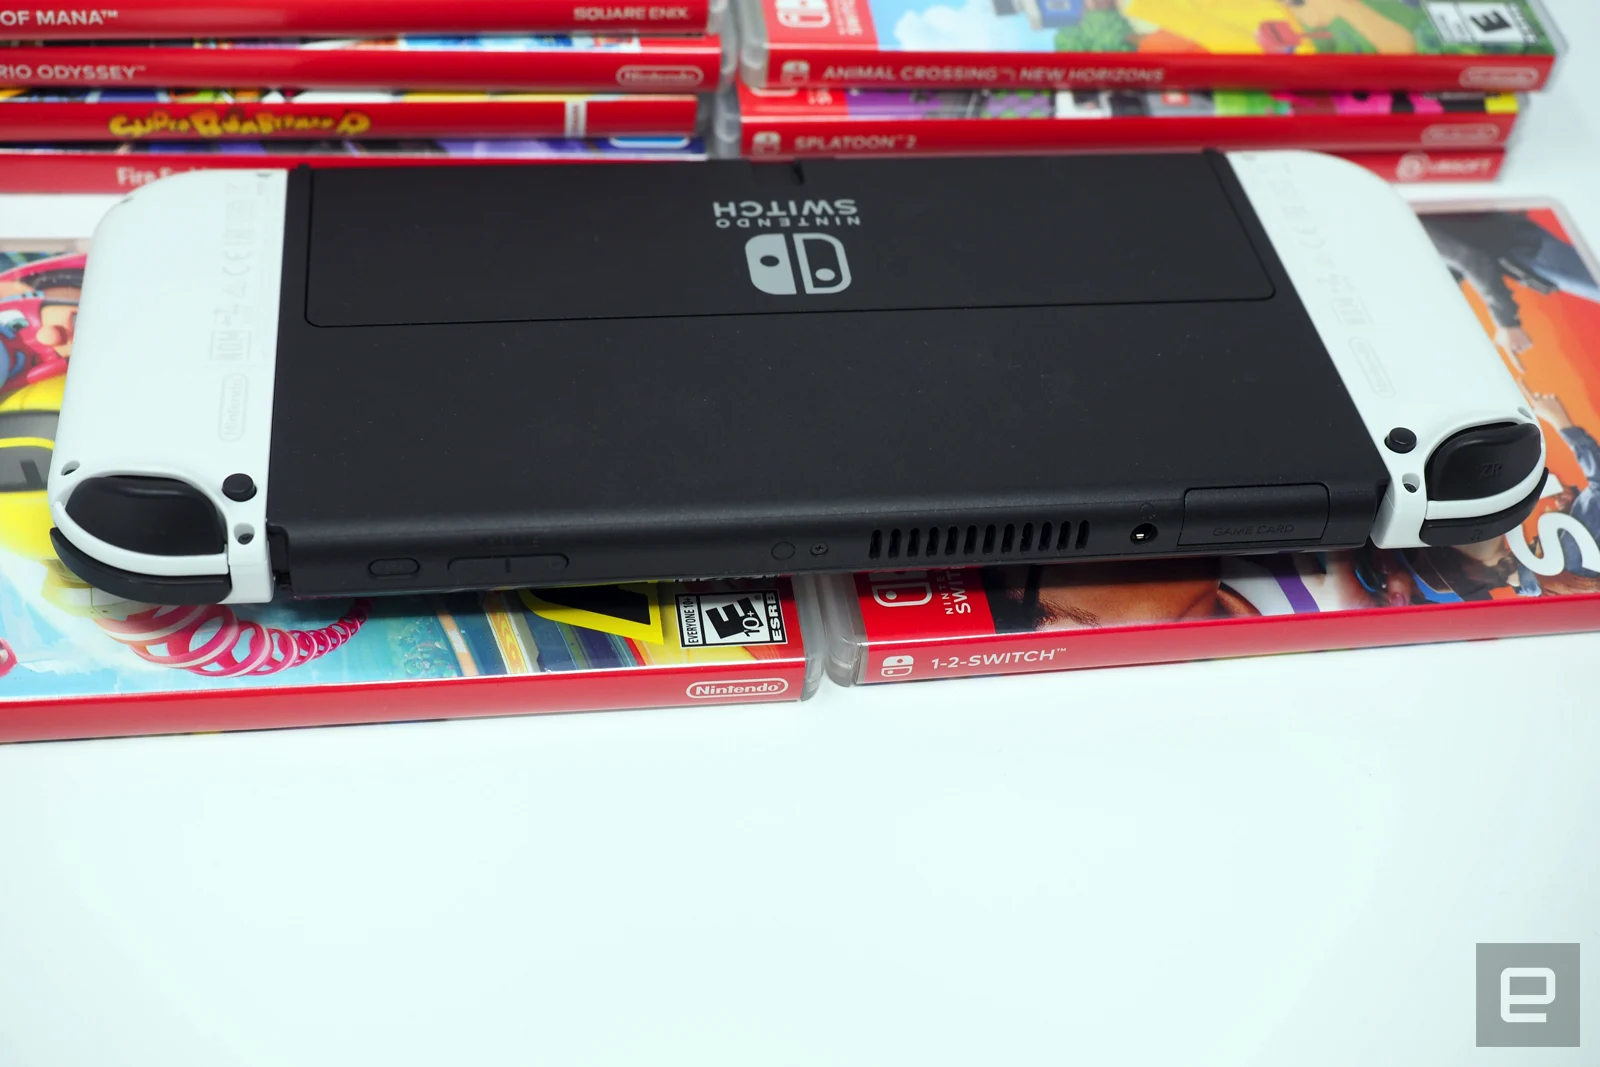 Nintendo Switch OLED Review: The Best Switch, but Still Mostly the